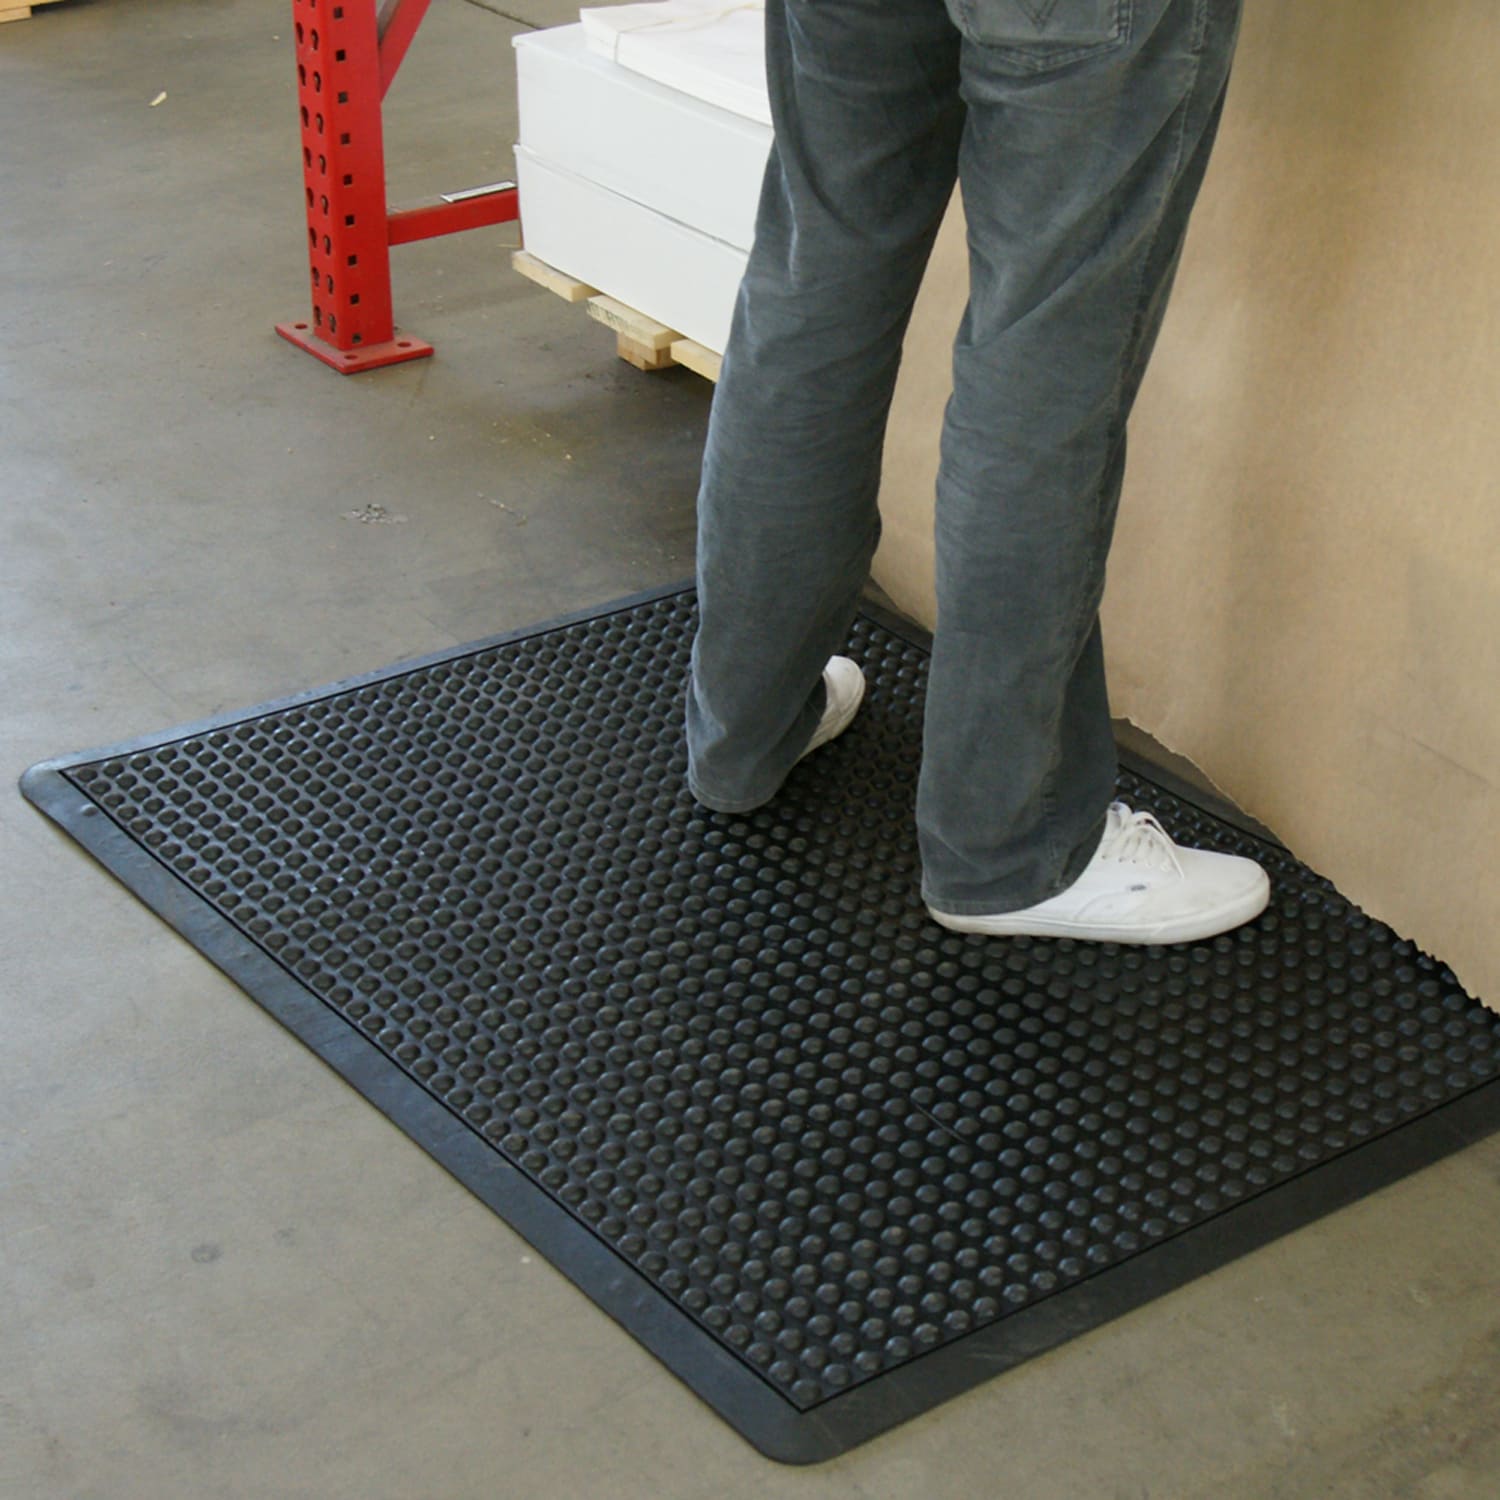 Rubber-Cal 2-ft x 3-ft Interlocking End Tile Square Indoor or Outdoor Home  Anti-fatigue Mat in the Mats department at